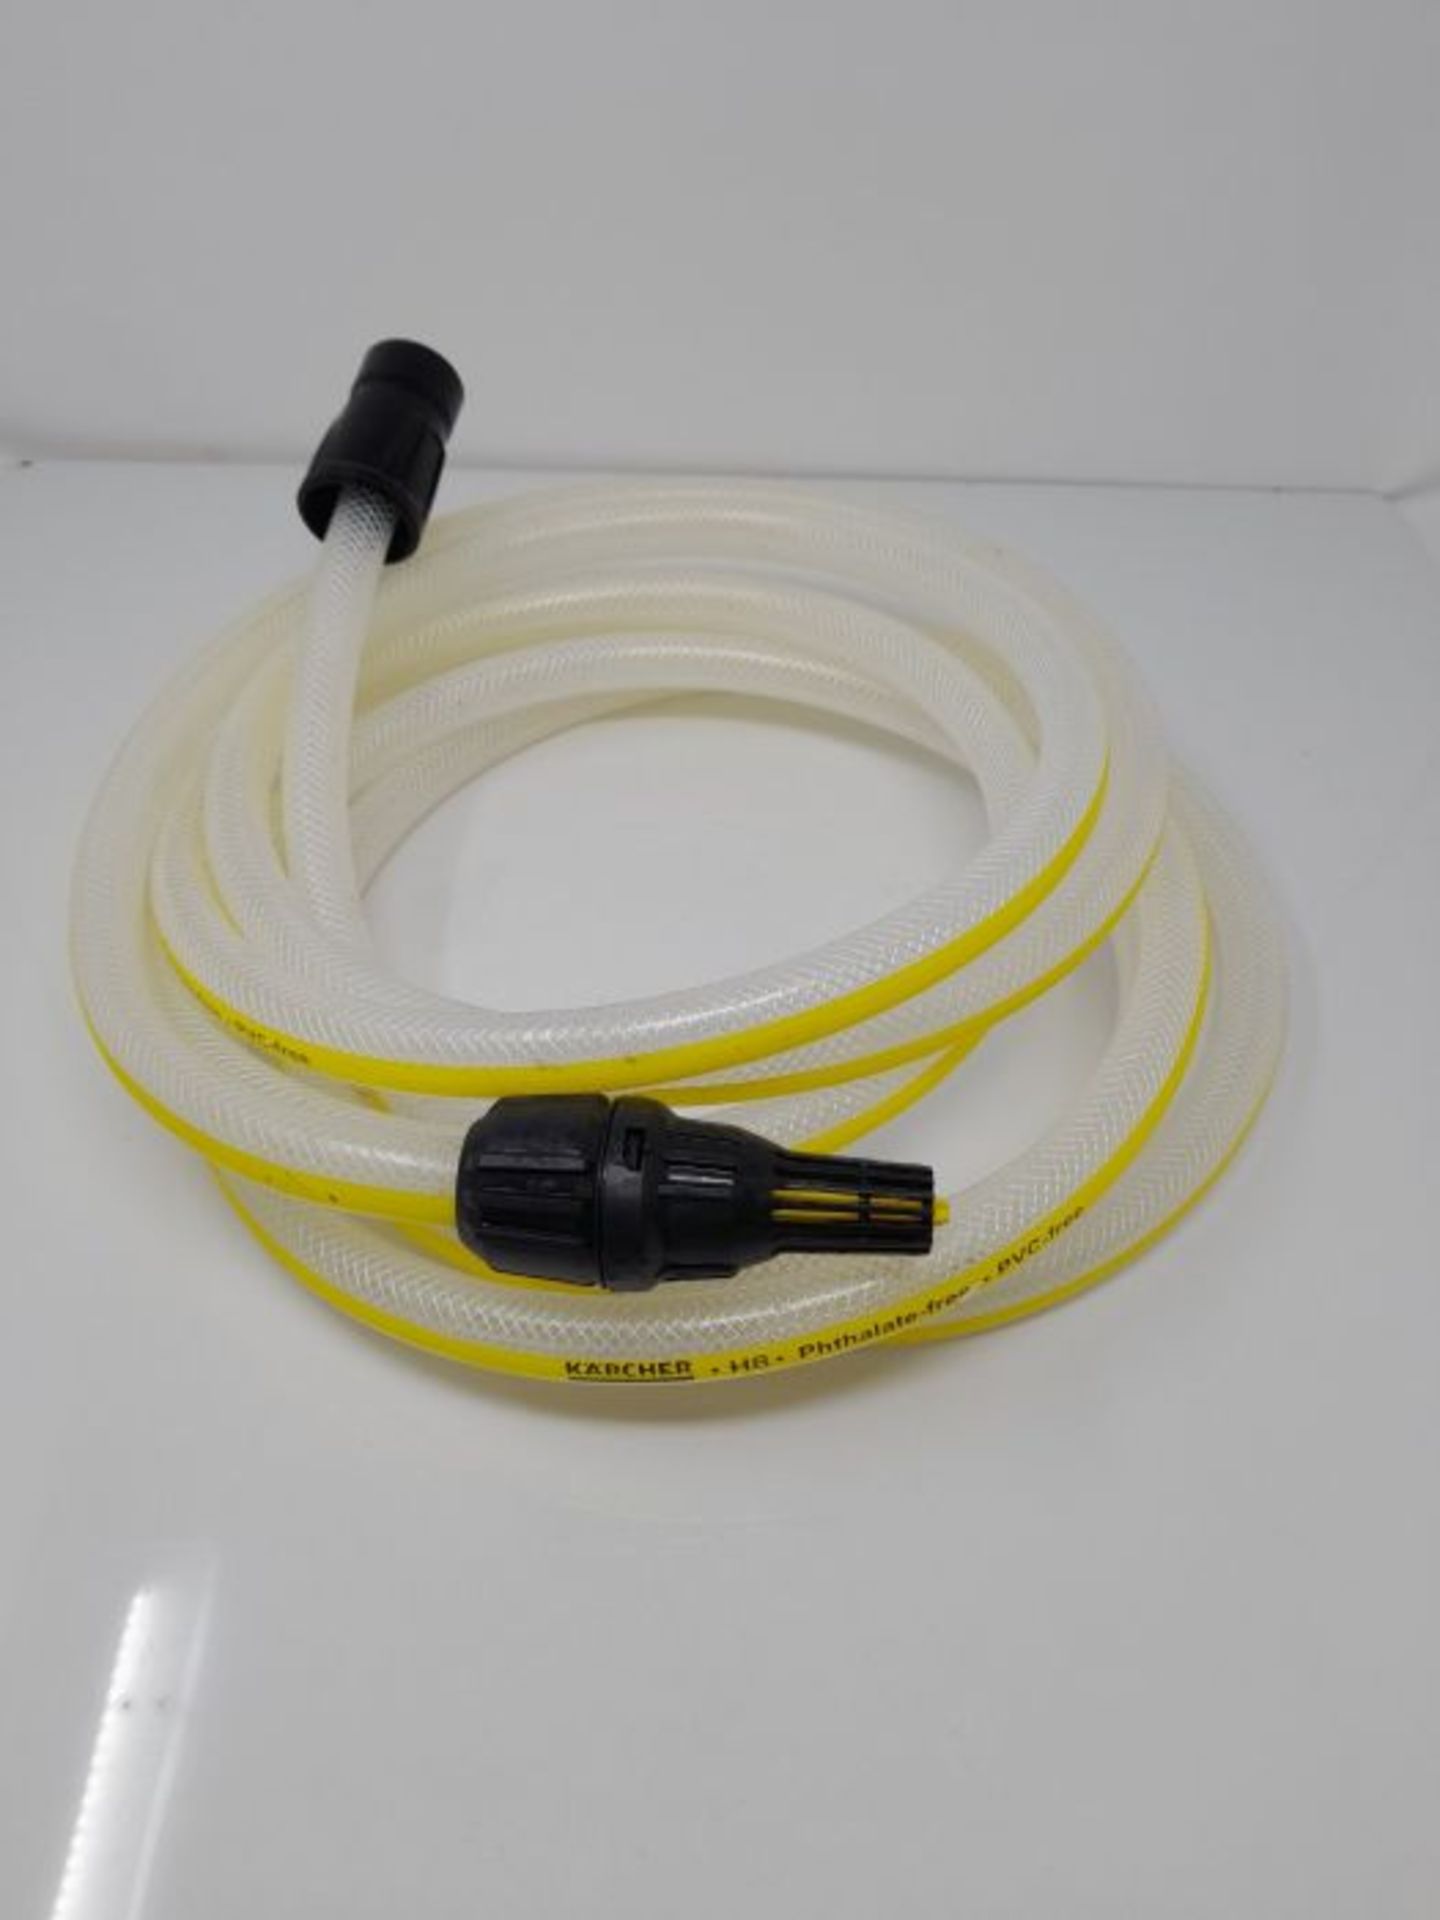 KÃ¤rcher 26431000 5 m Suction Hose and Filter for Pressure Washer Accessory, White, - Image 3 of 3